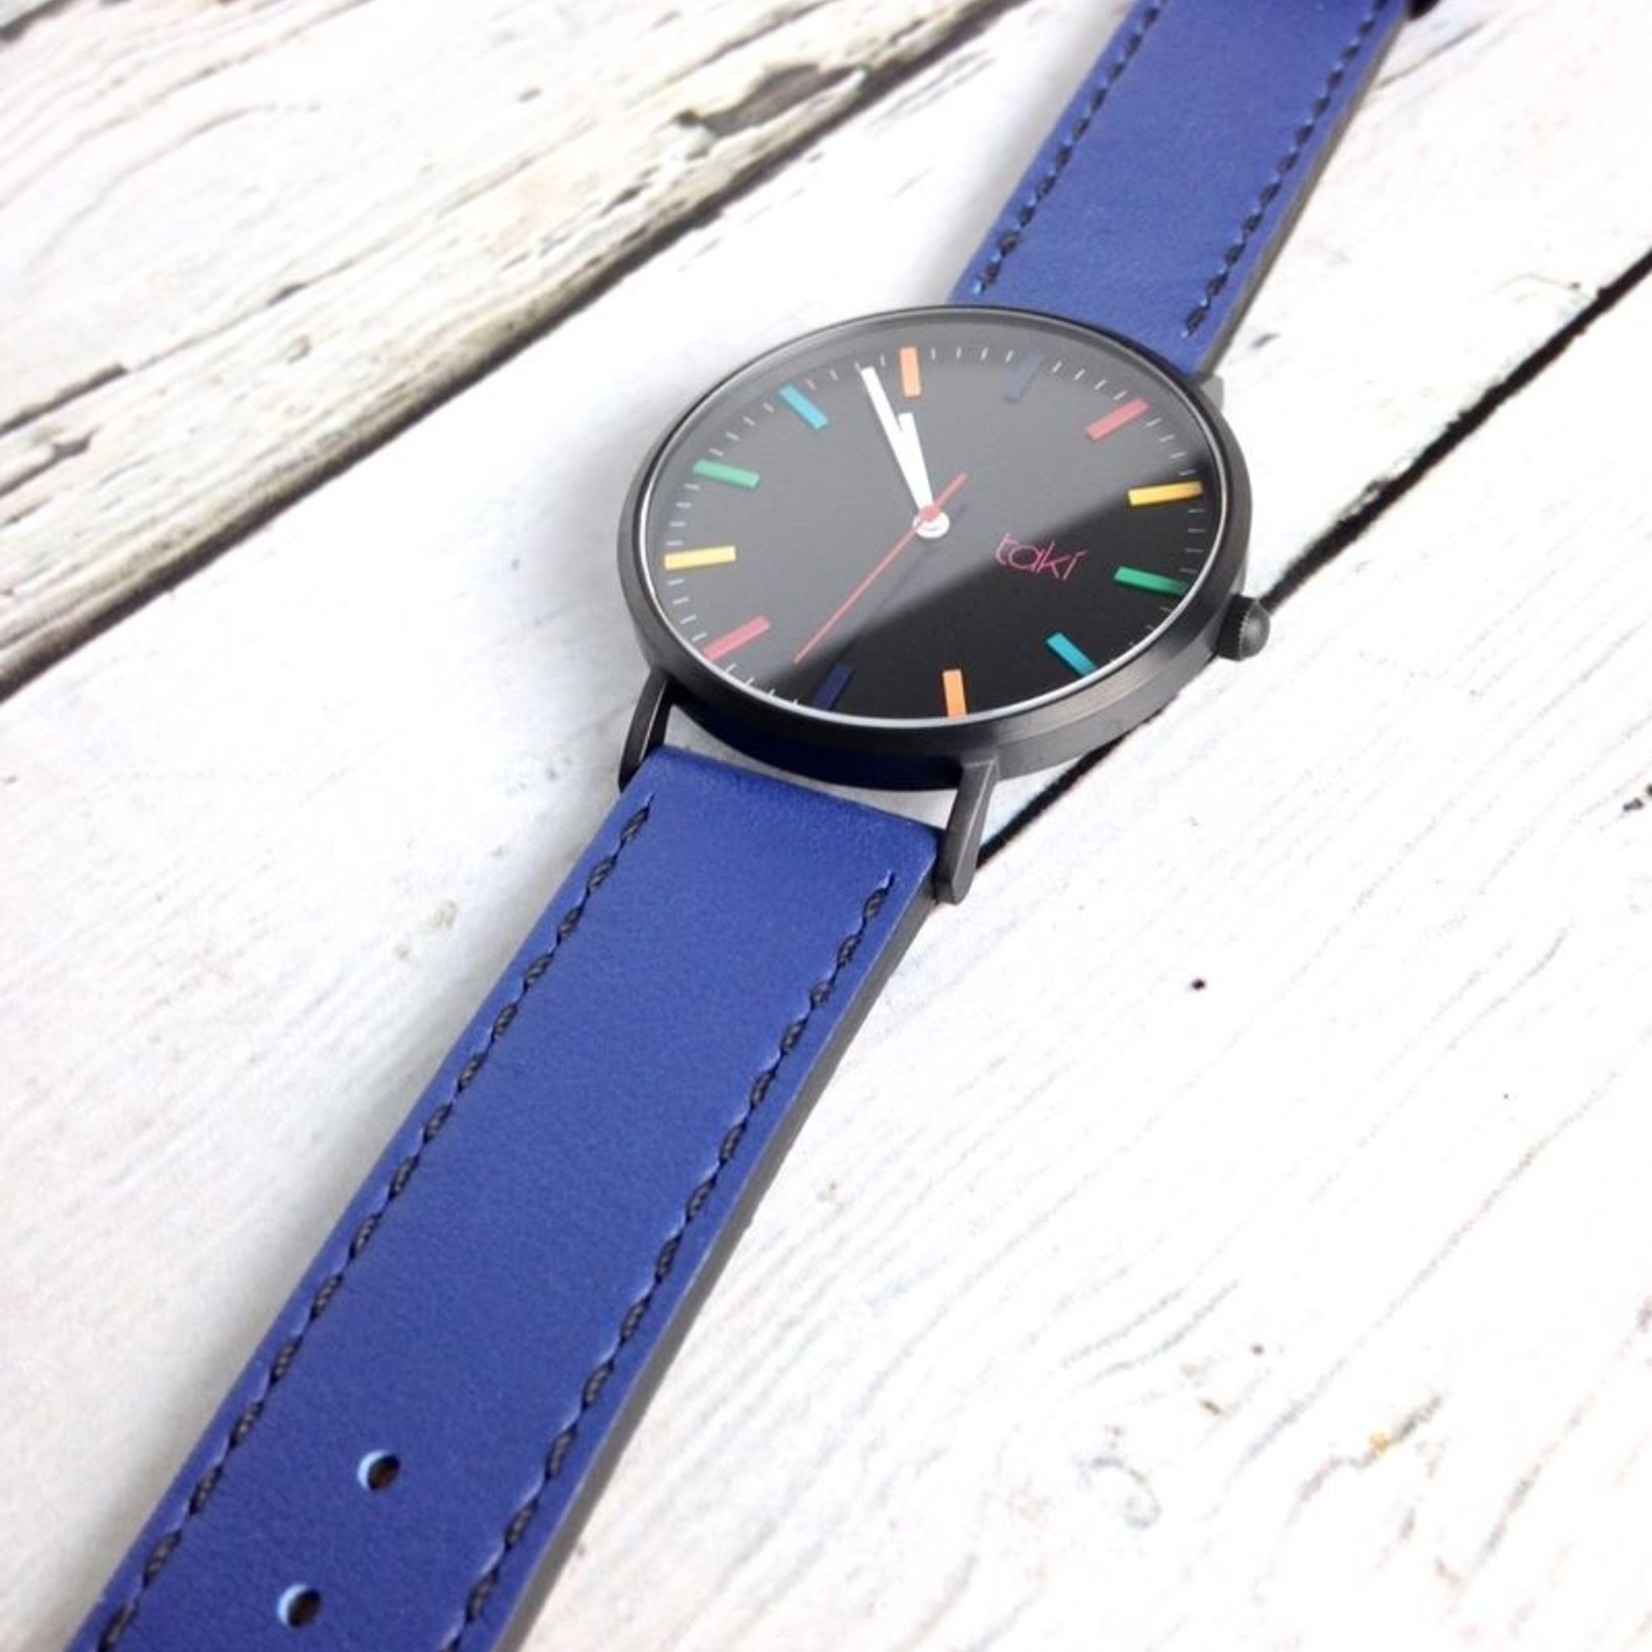 Linden Watch, Black Face and Royal Blue Band with a Rainbow of indicators